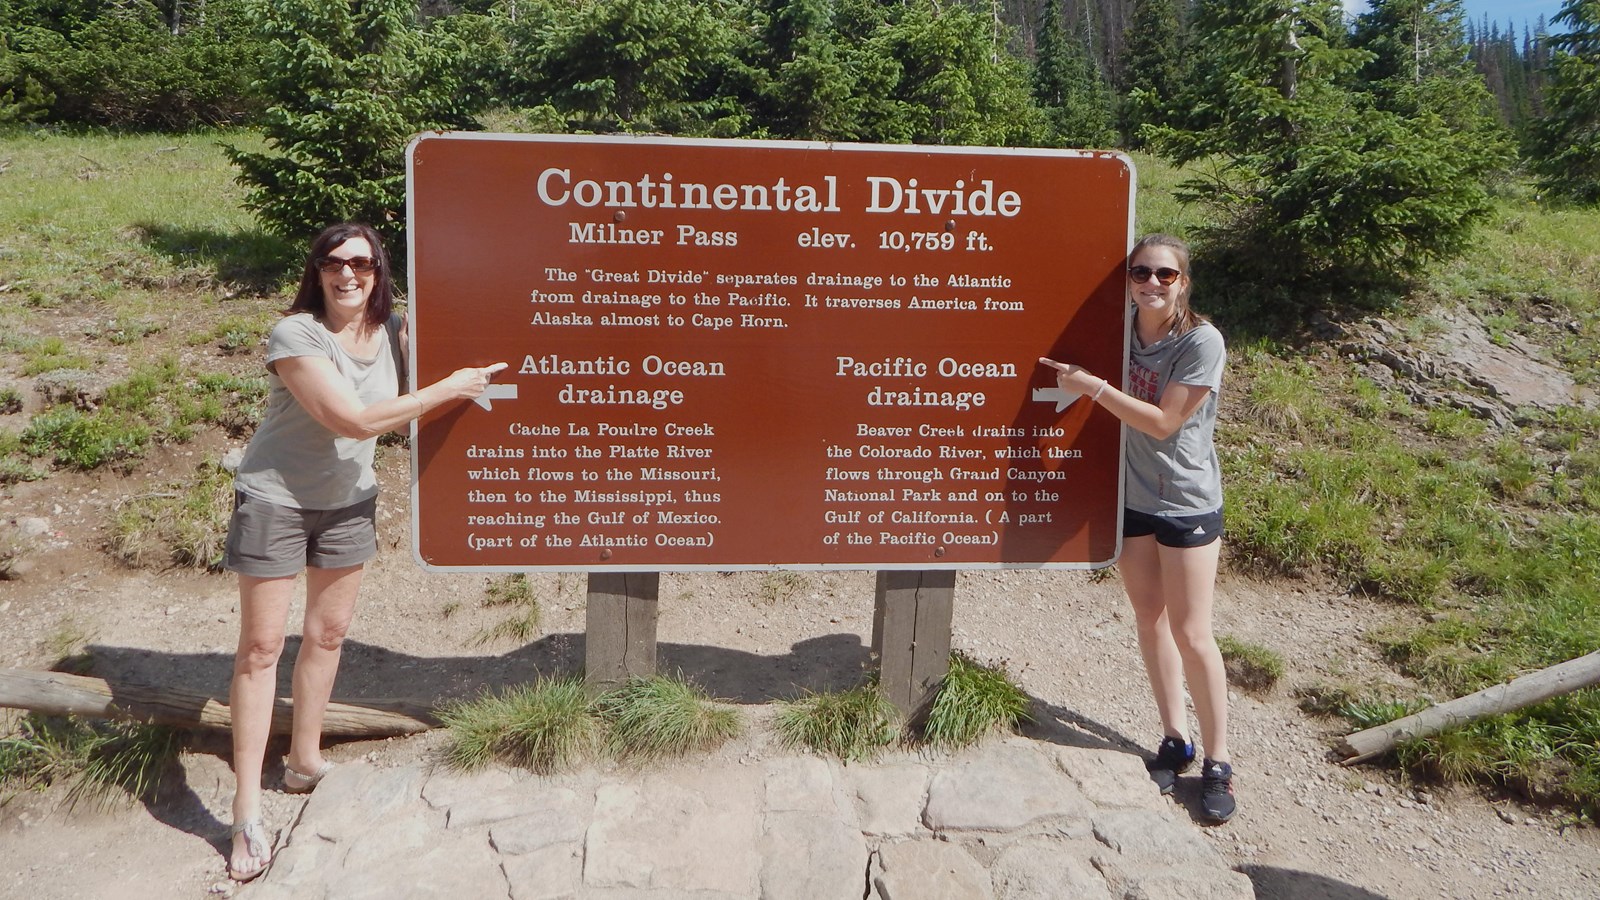 Two people stand next to a brown sign that reads: Continental Divide, Milner Pass, elevation 10,759 